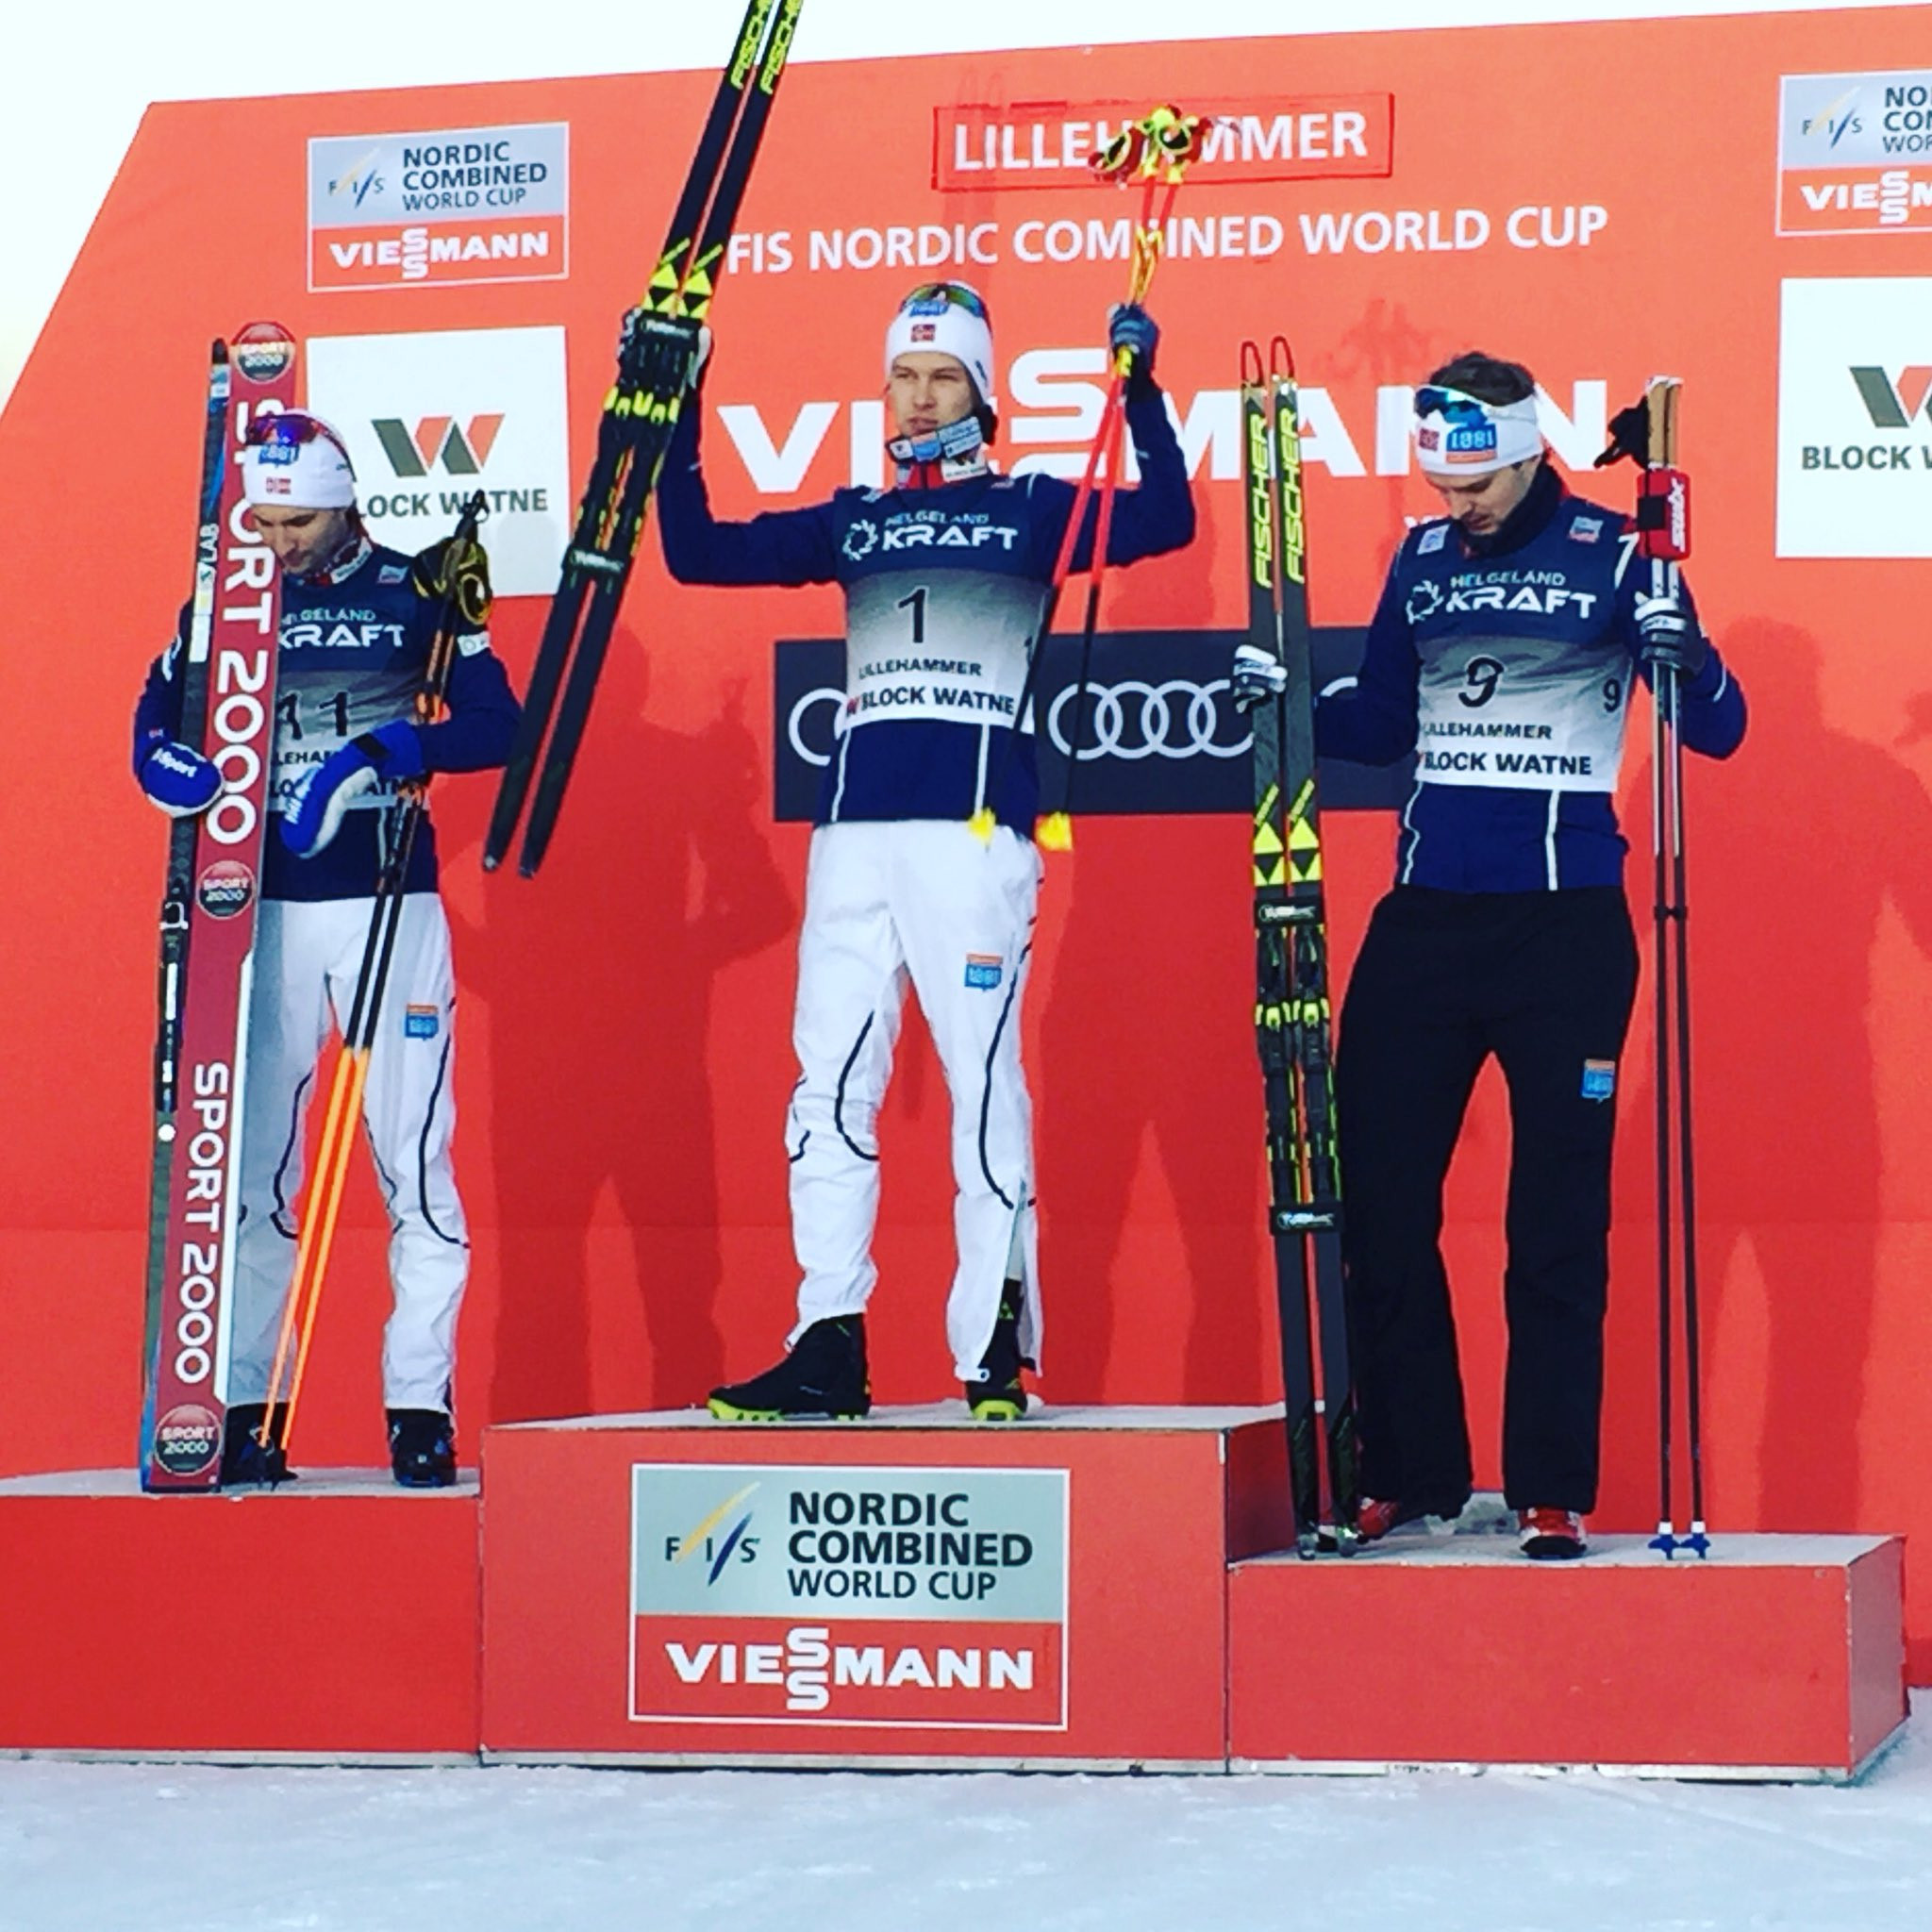 Norwegian trio sweep the boards at FIS Nordic Combined World Cup in Lillehammer